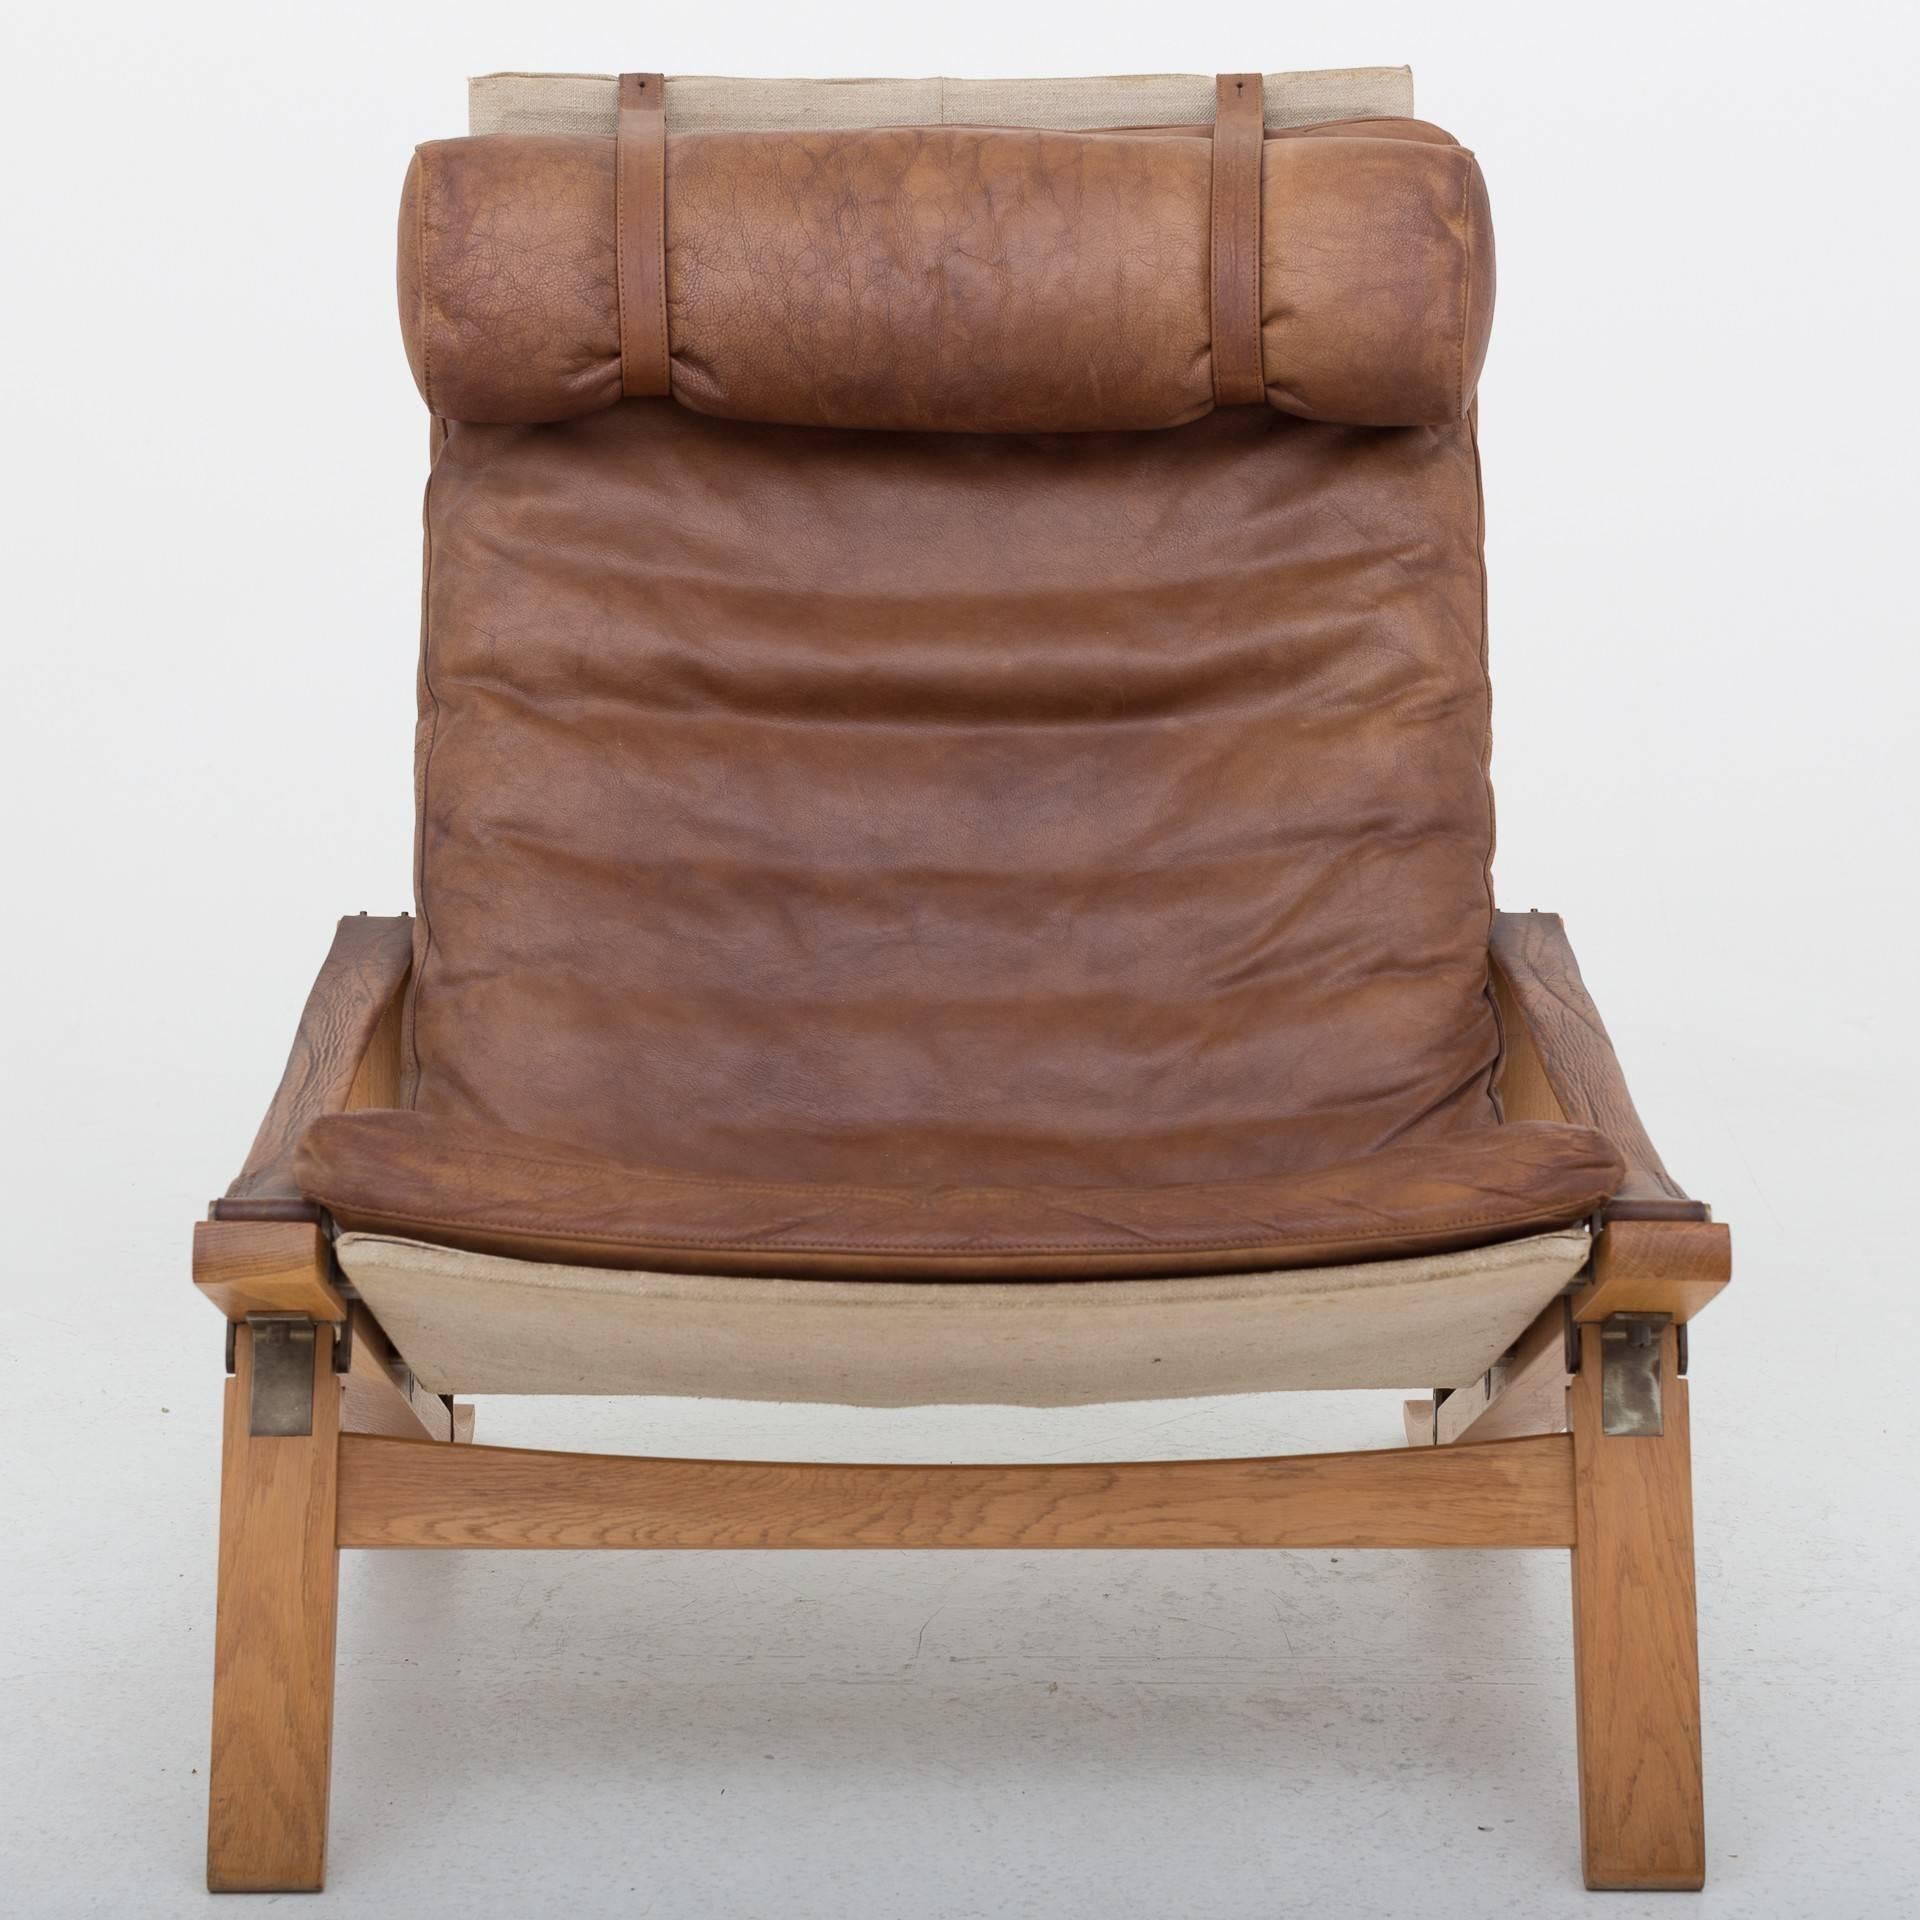 A pair of lounge chairs, model PB 10 in oak, patinated brown leather and canvas. Designed by Preben Fabricius & Jørgen Kastholm.